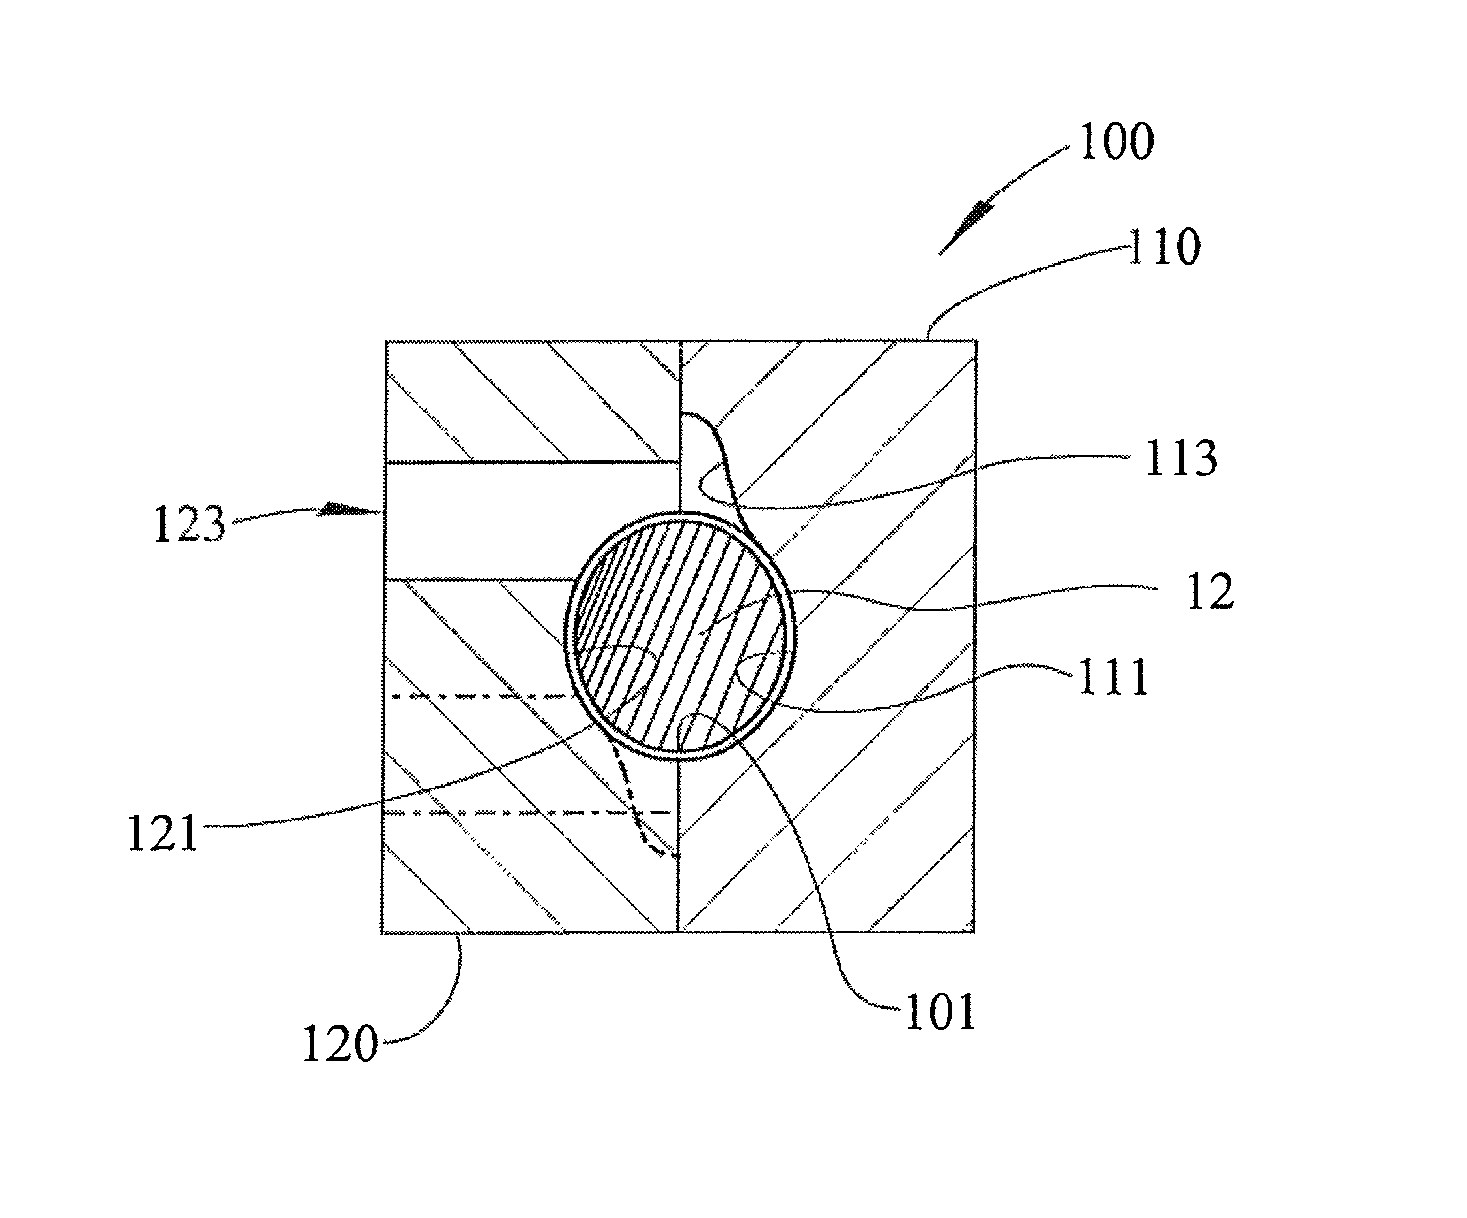 Apparatus and method of forming barbs on a suture